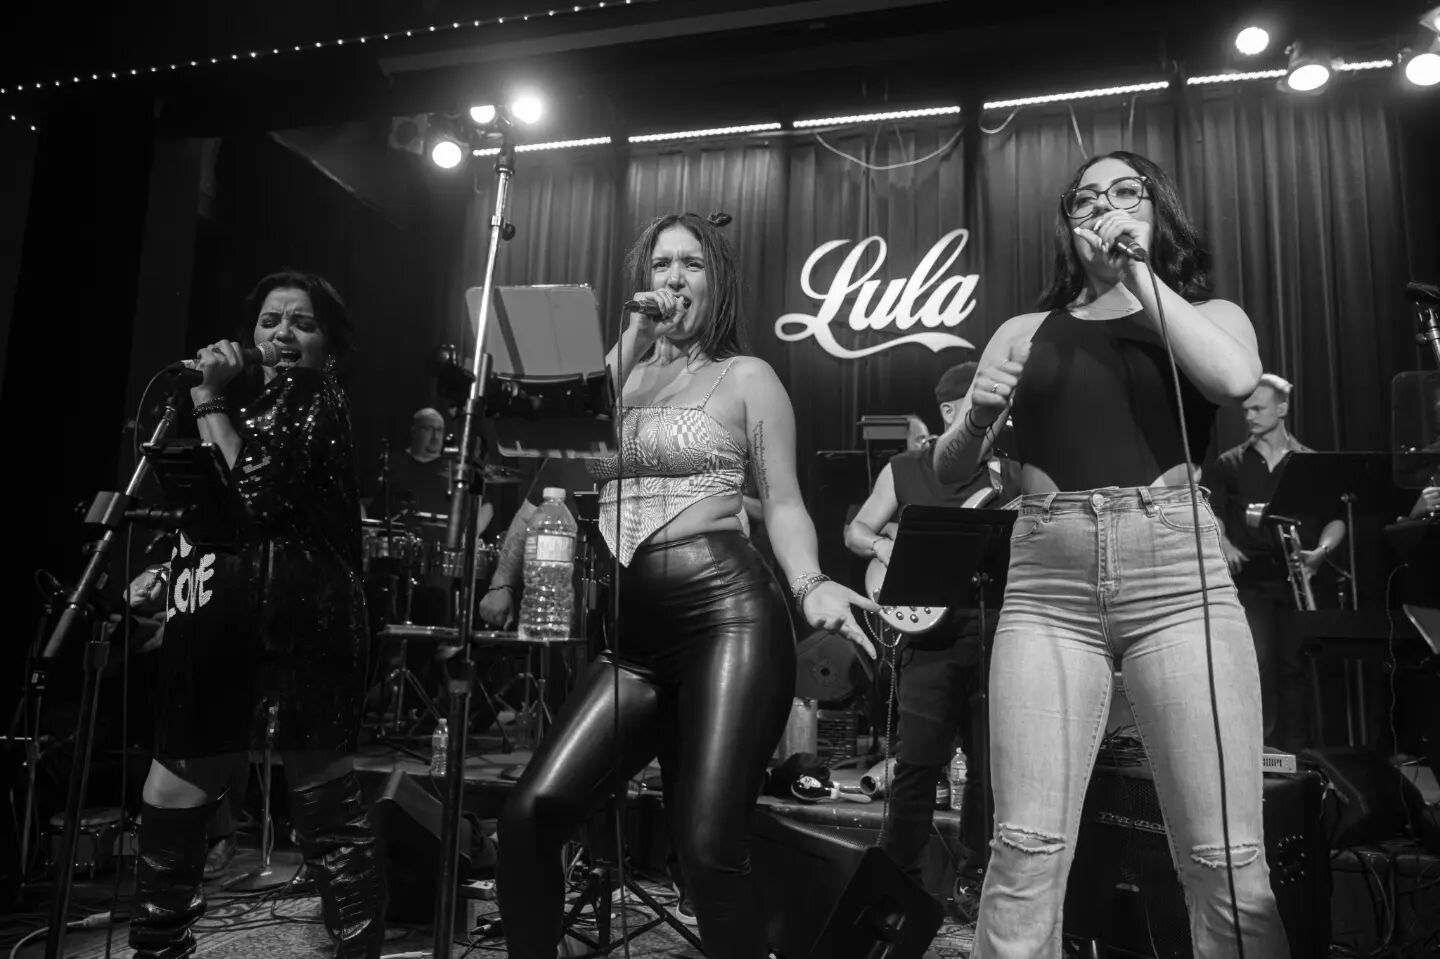 Throwback to a memorable night! A few photos from our first SWA Divas Show @lulalounge a few weeks ago. Thank you @guevarafilms for capturing these amazing shots! 

#SWADivas #guevarafilms #lulalounge
#SalserosWithAttitude #SWA #SuaSua 
#SupportLocal